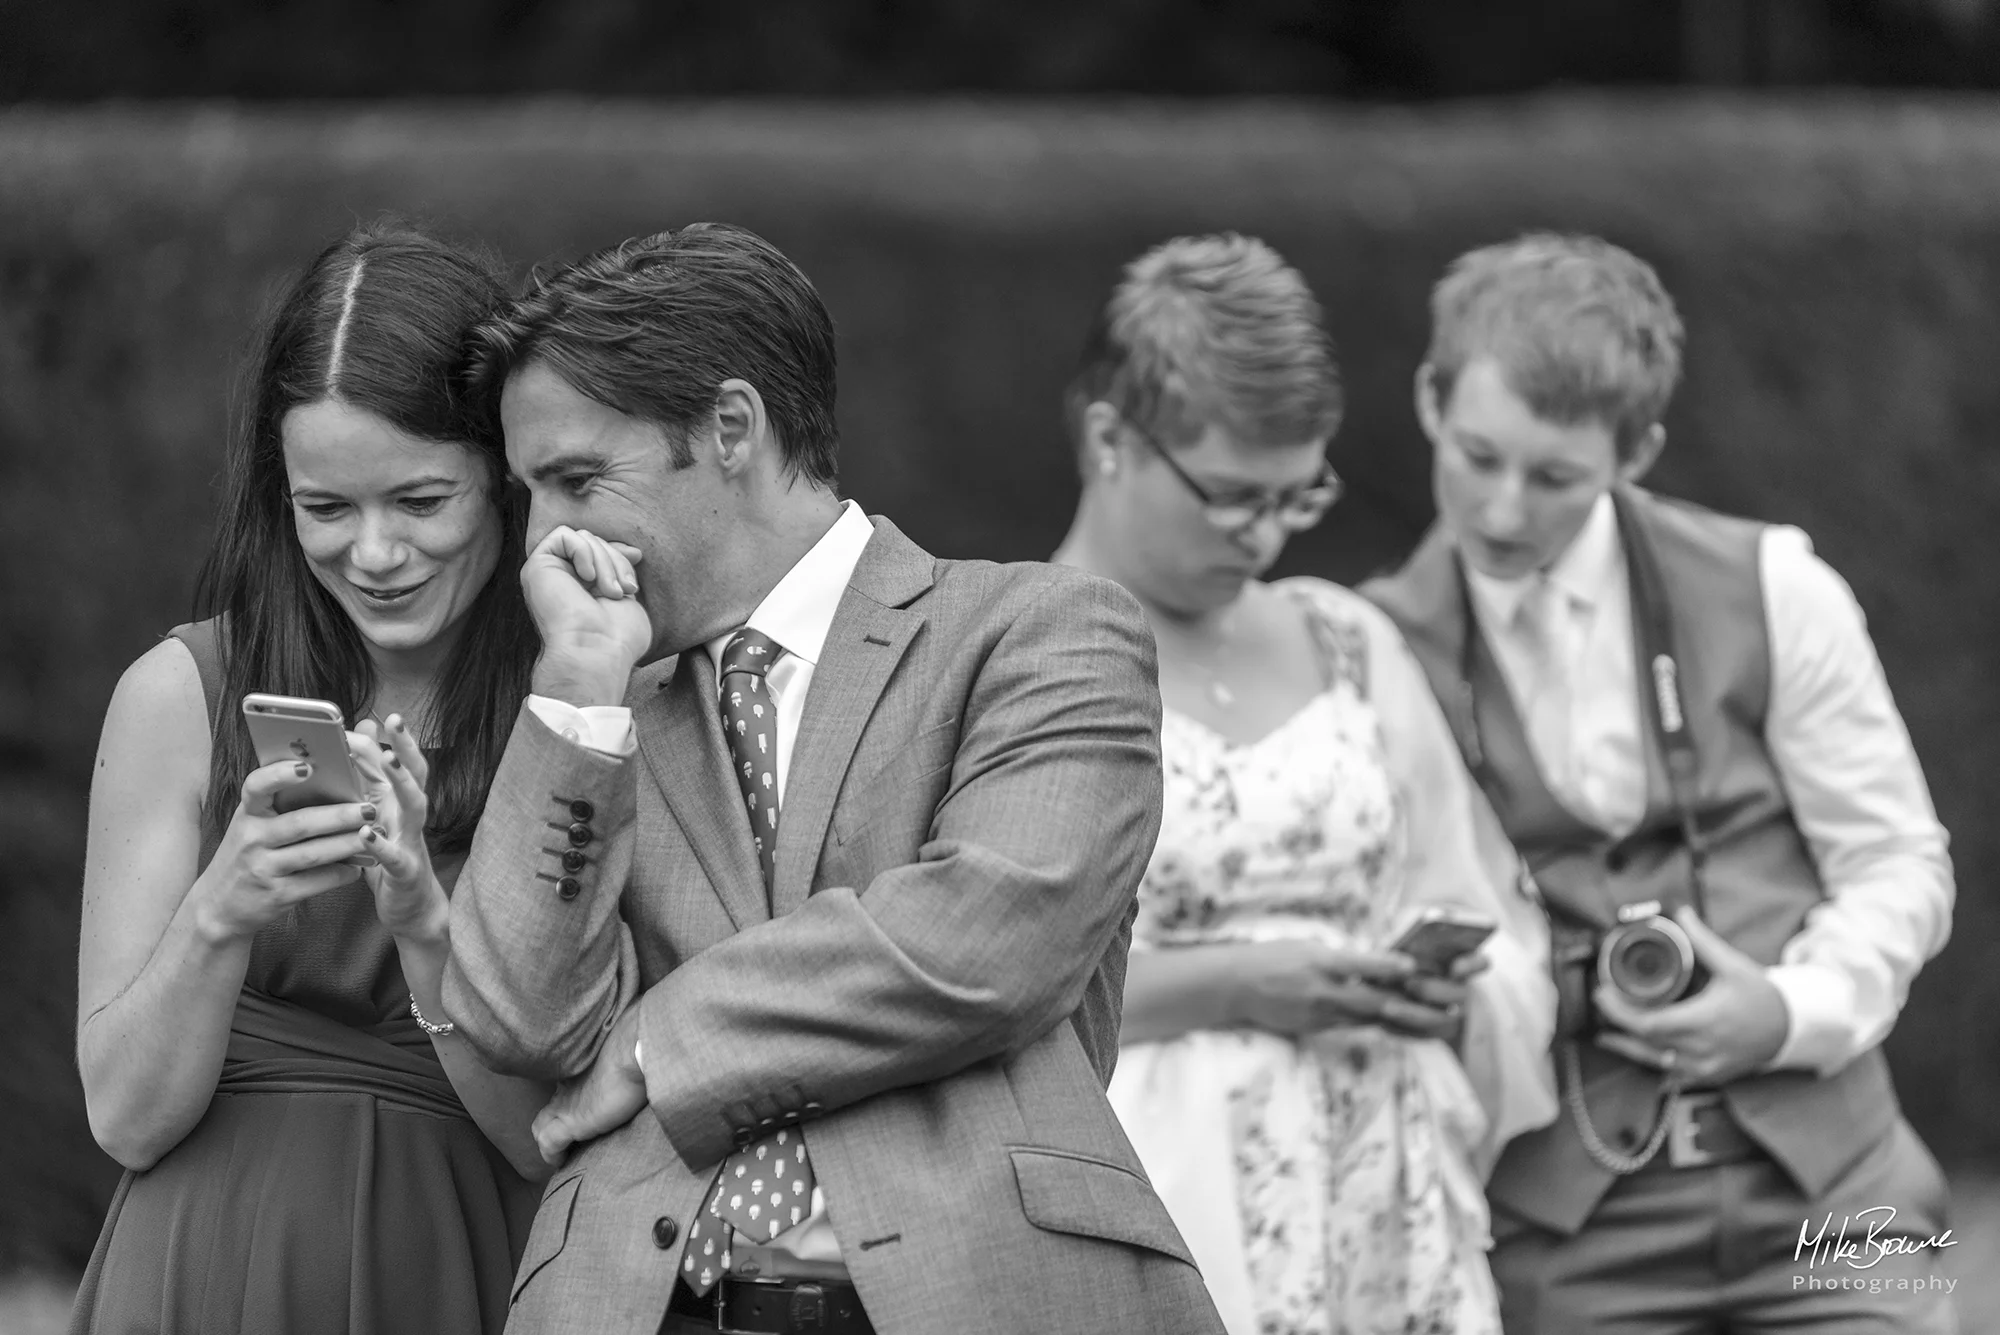 Guests at a wedding looking at photos on their phones